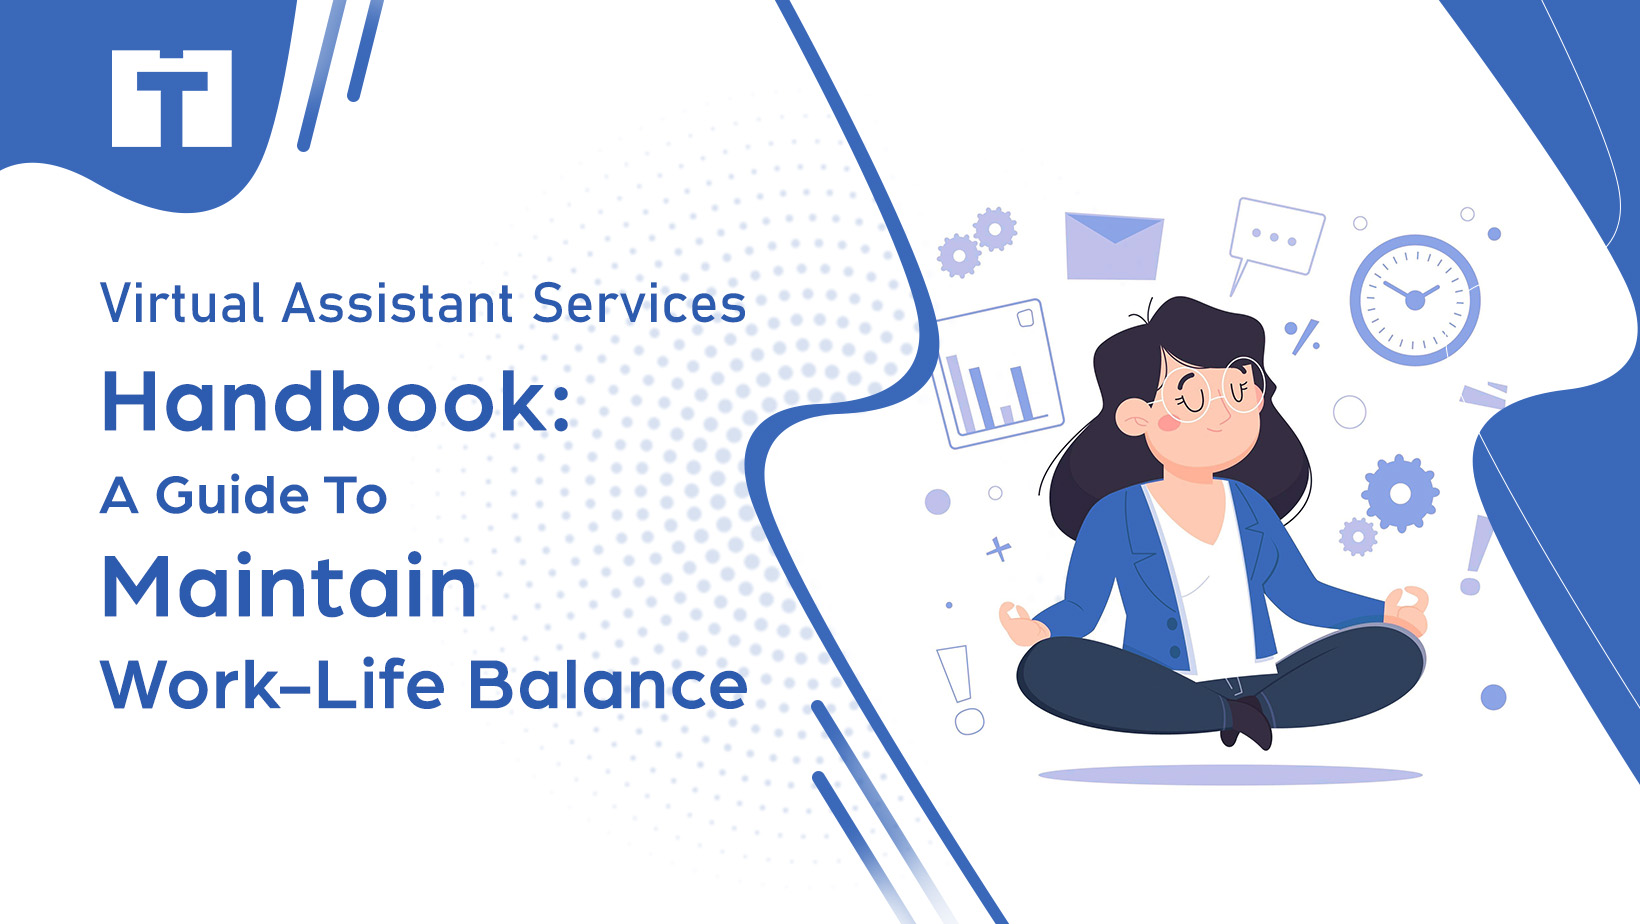 Virtual Assistant Services Handbook: A Guide To Maintain Work-Life Balance